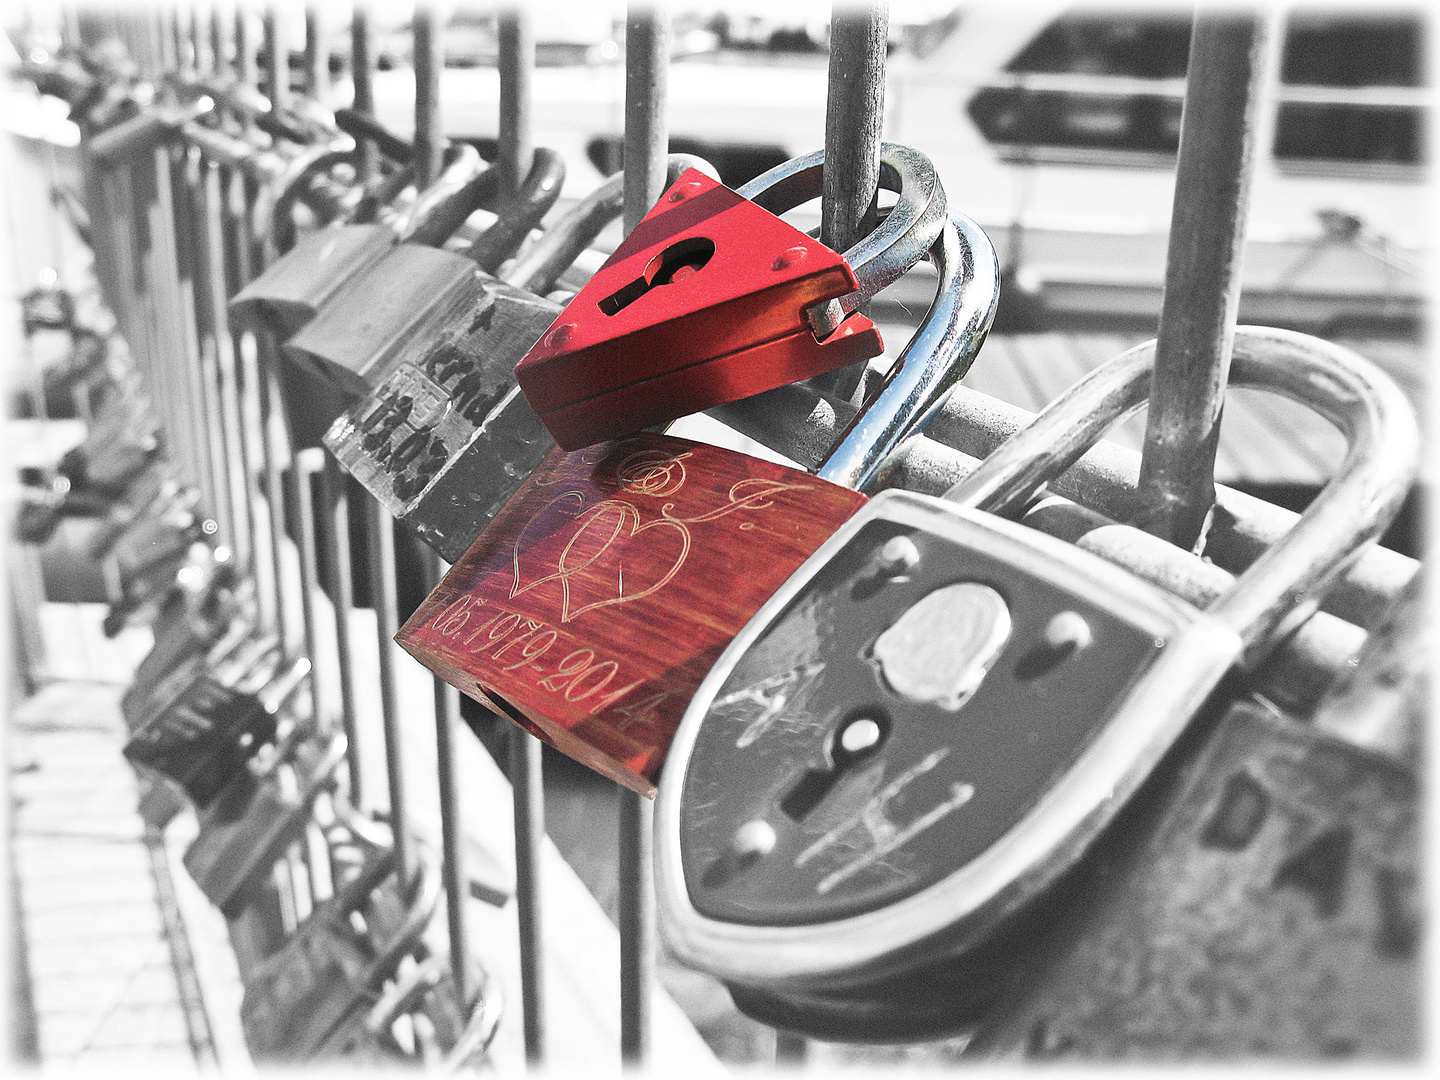 Liebe ist... a red ColorKey